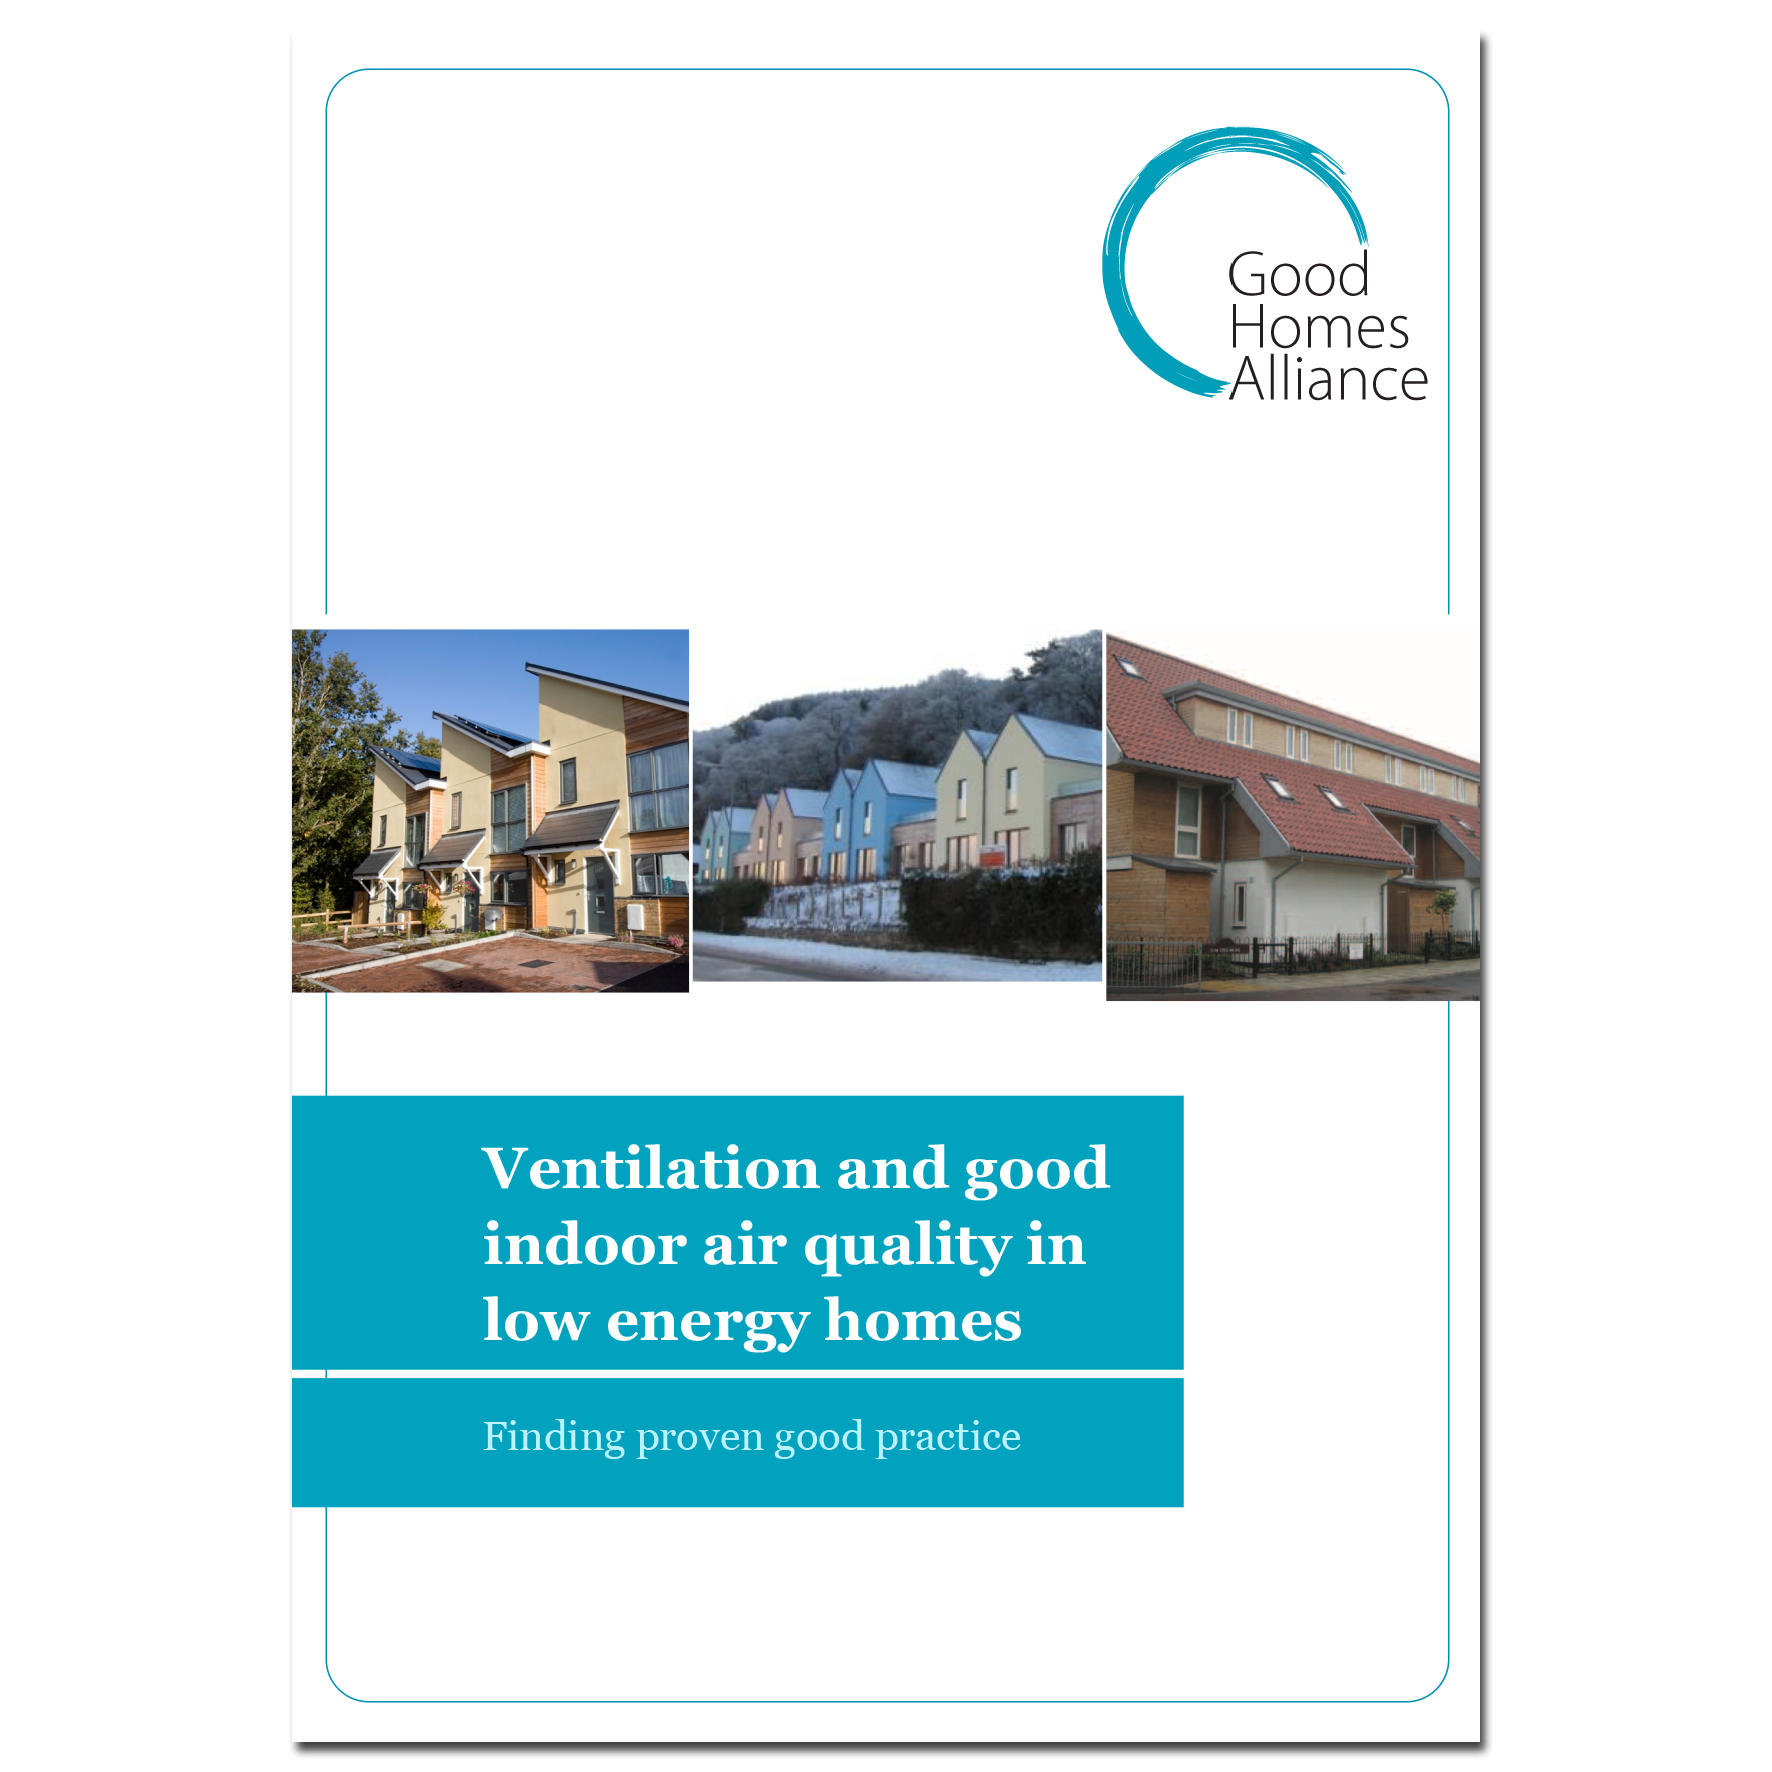 Ventilation and good indoor air quality in low energy homes - GHA Research Project funded by NHBC Foundation